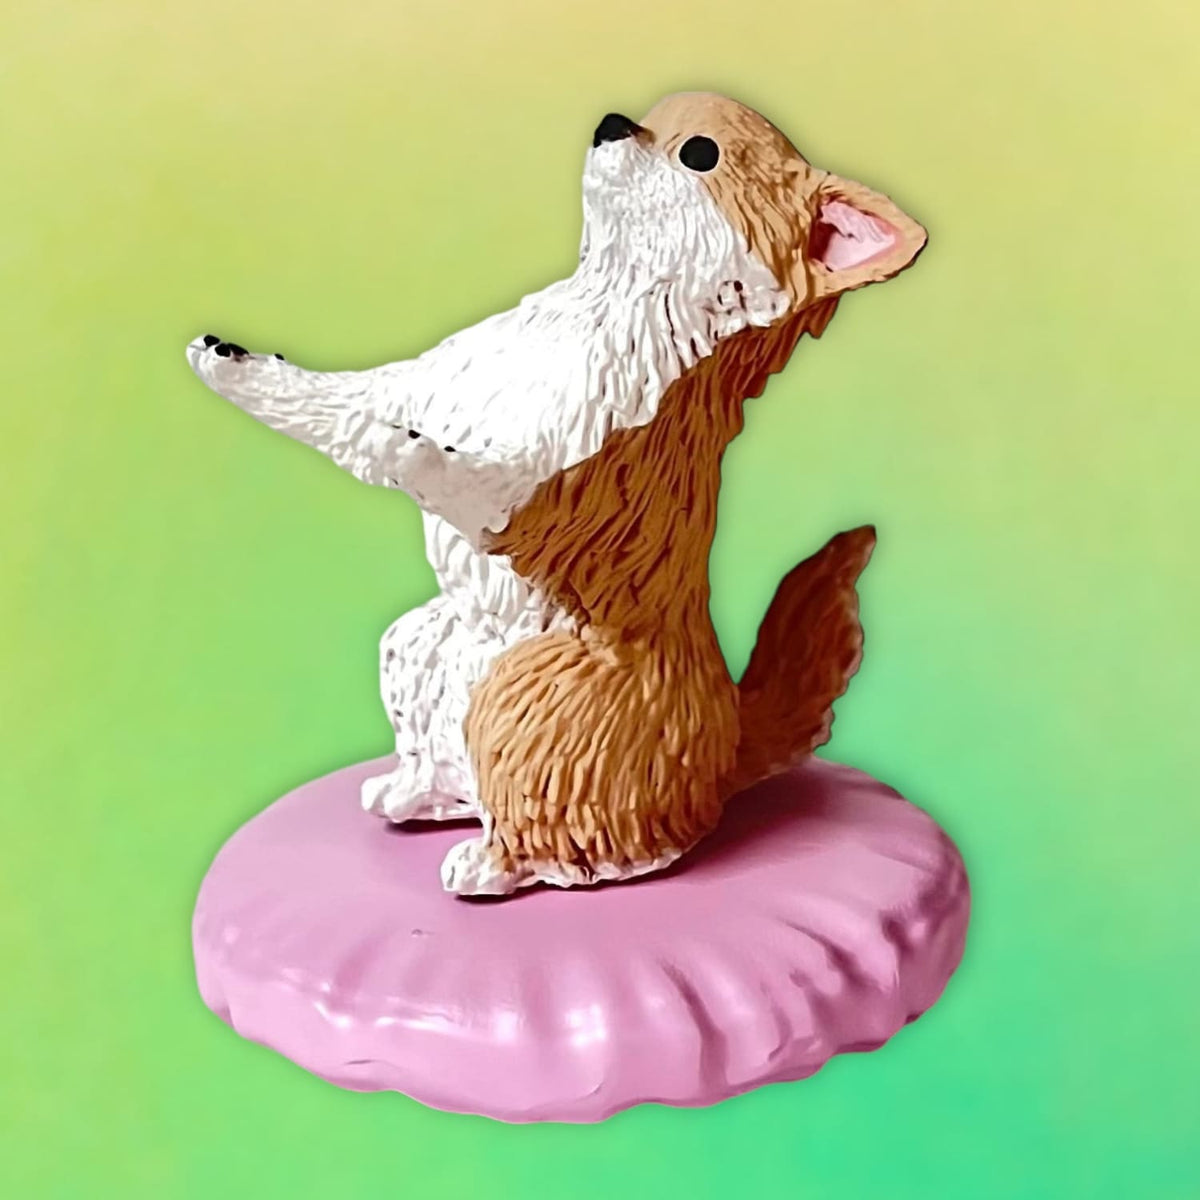 Dog Pen Holder Figurine Blind Box - Collectible Lover Gifts